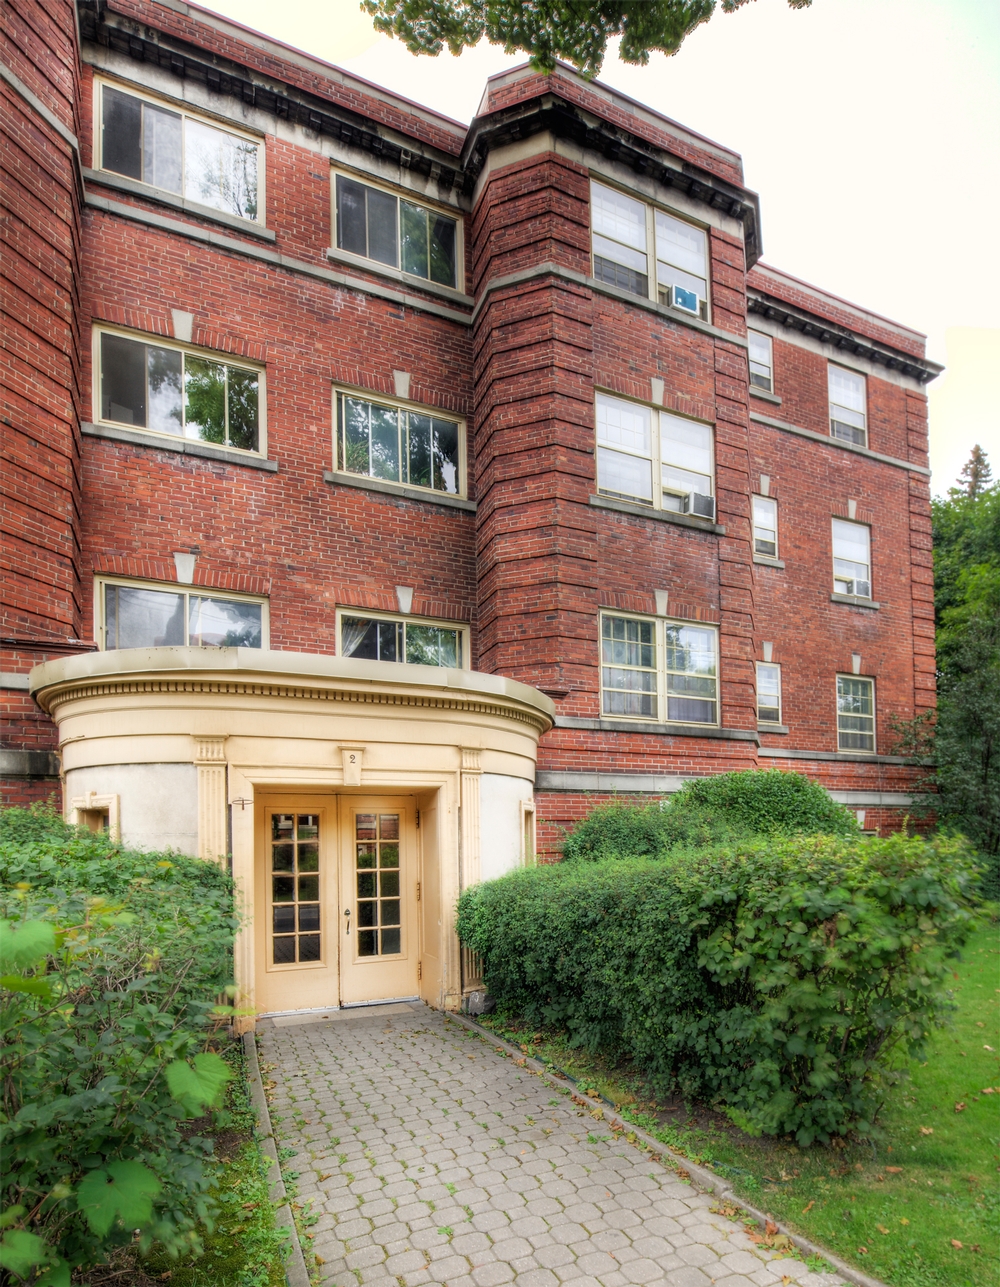 1 bedroom Apartments for rent in Hampstead at 1-2 Ellerdale - Photo 01 - RentersPages – L9522